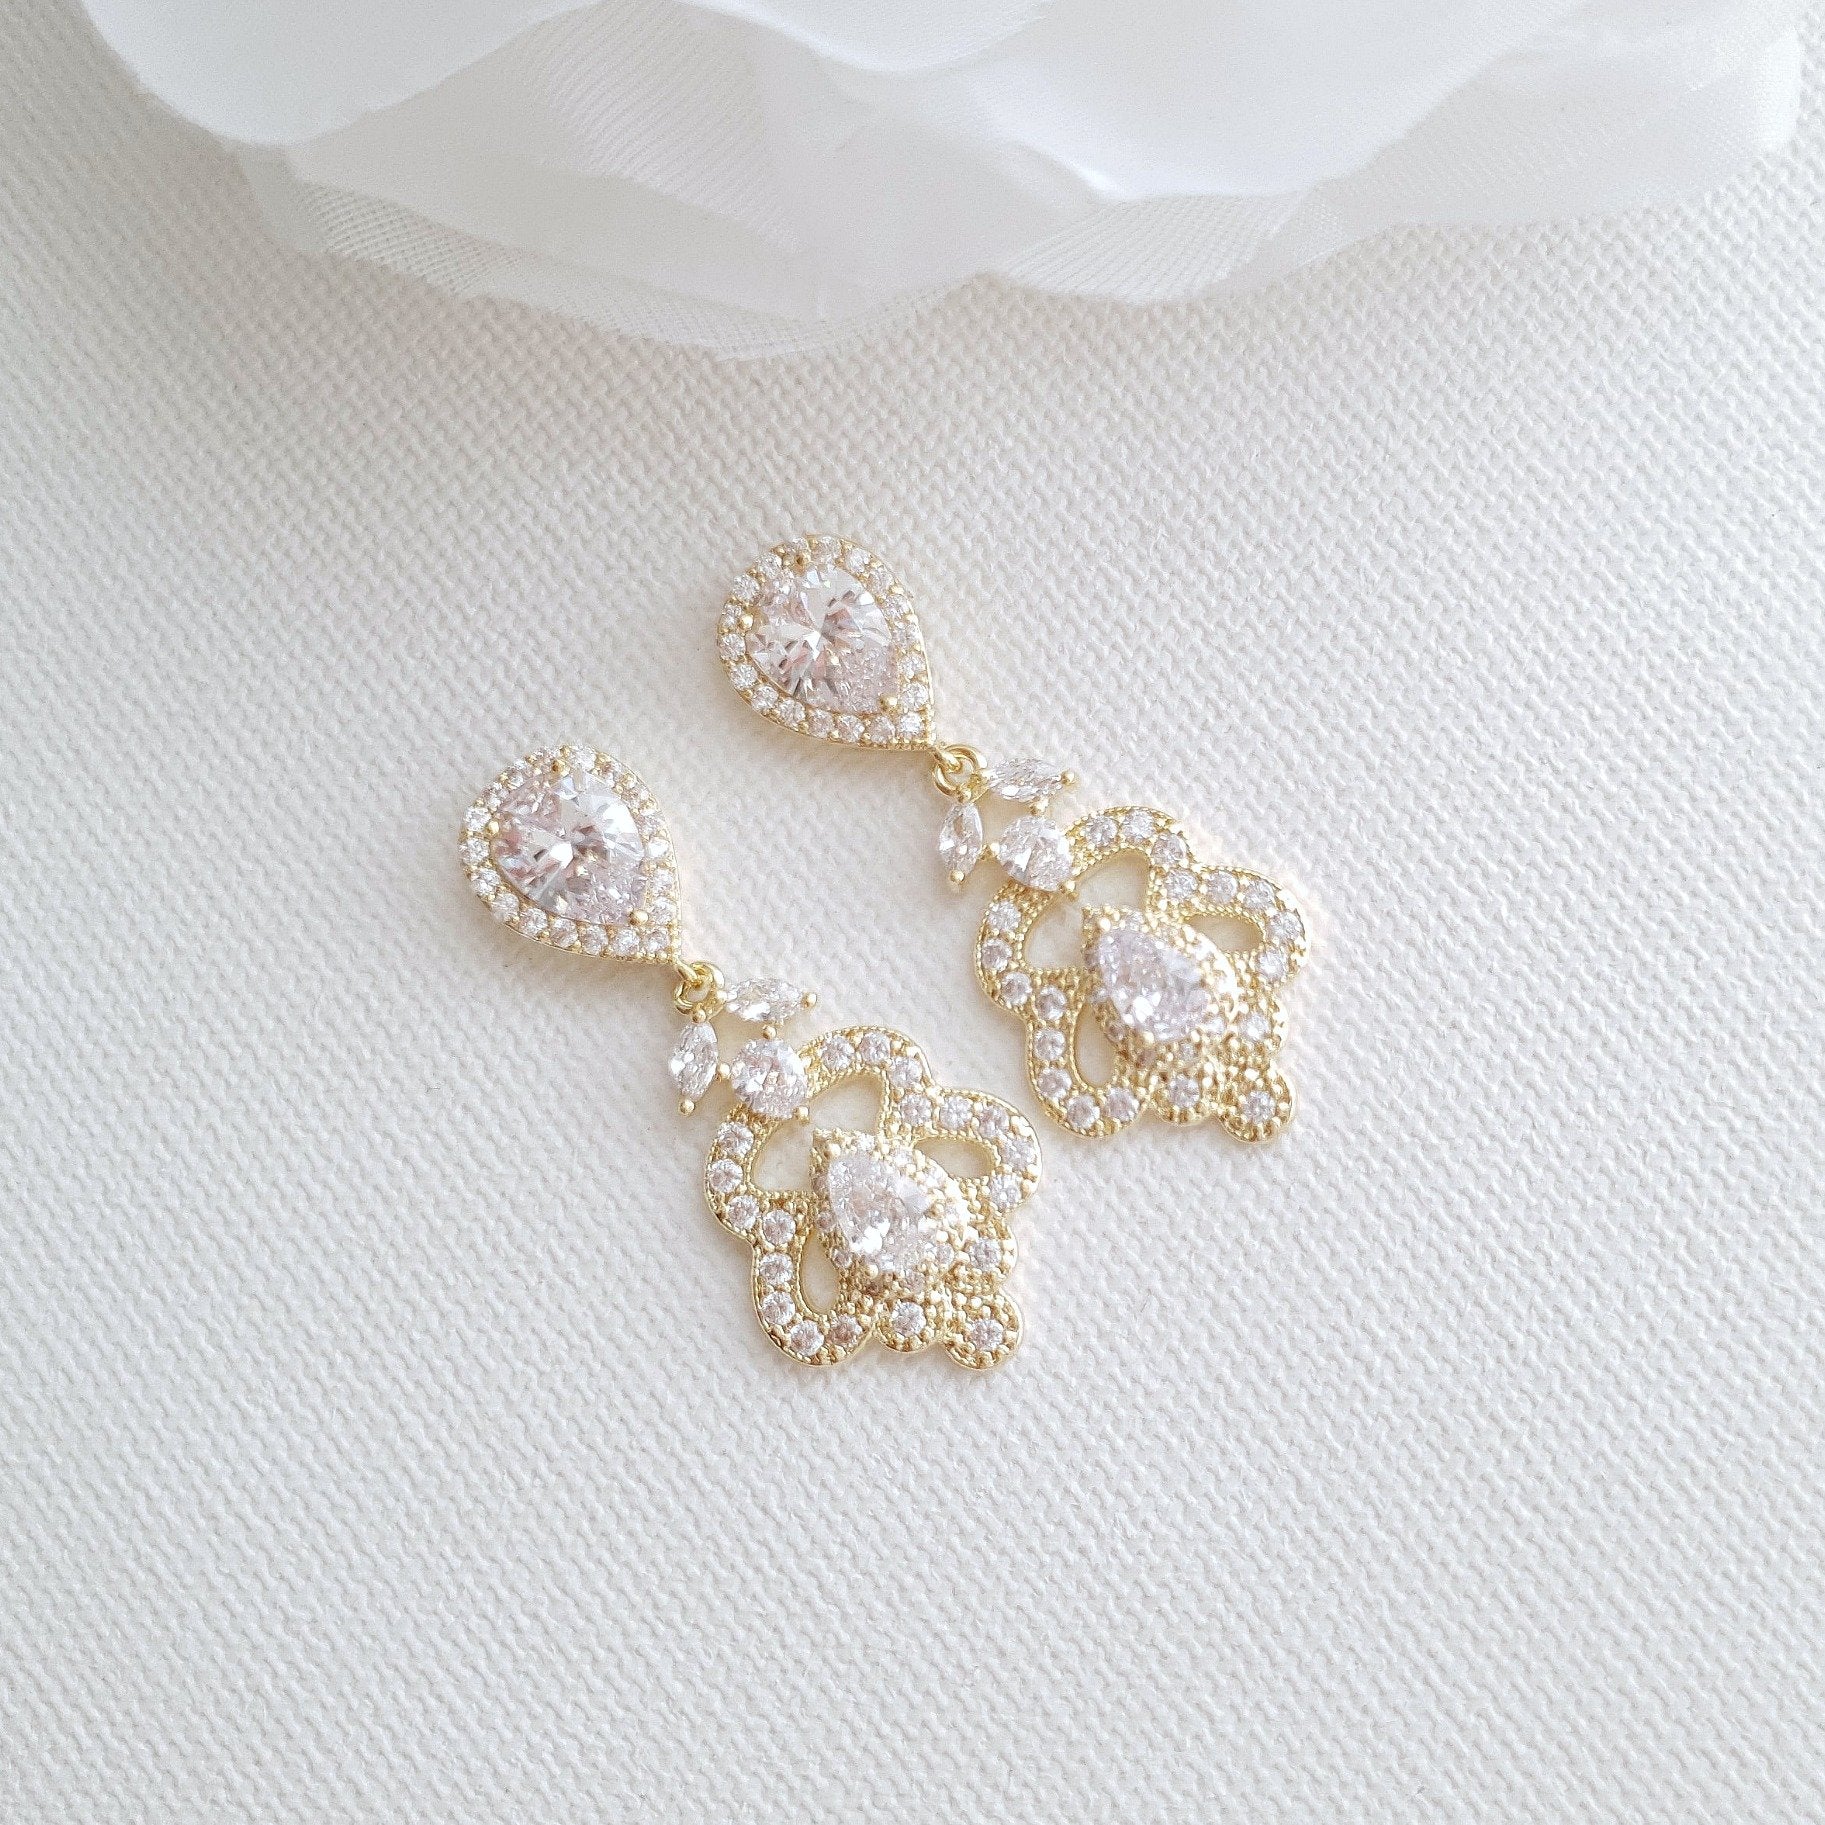 Rose Gold Vintage Earrings for Brides- Norma